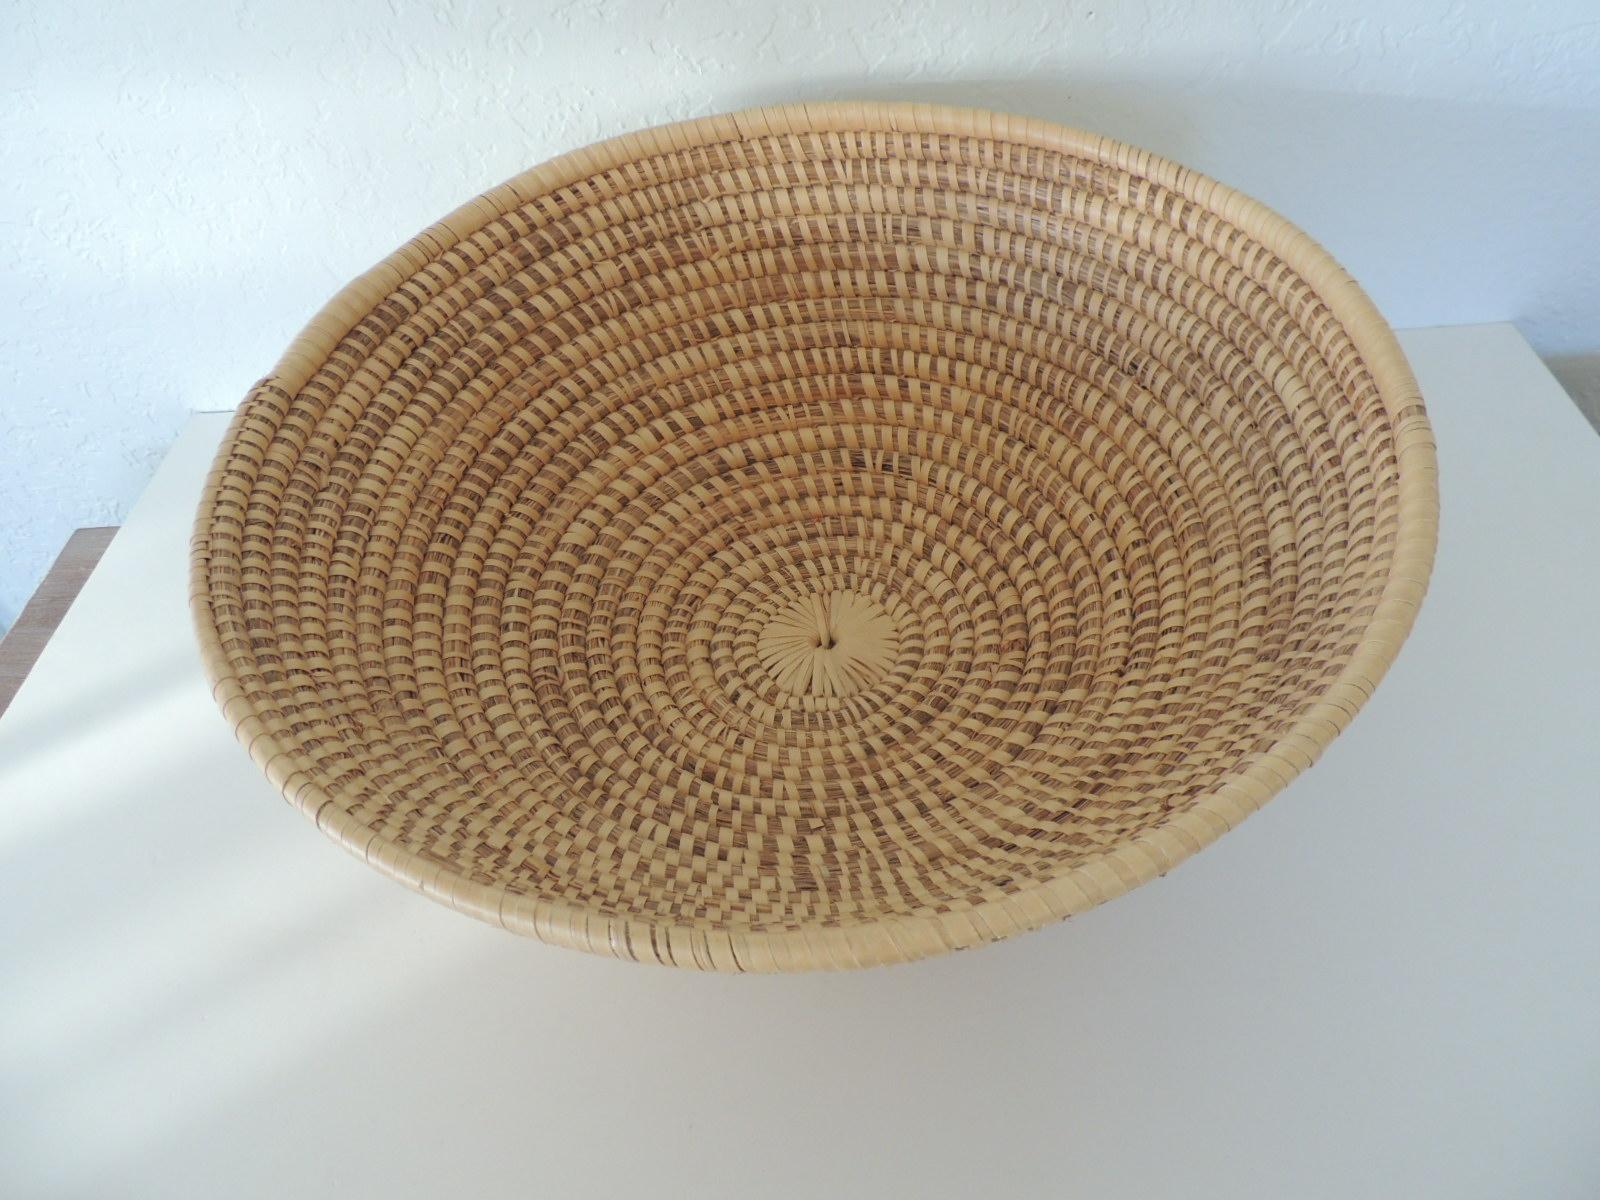 Large round seagrass decorative basket. Deep fruit bowl.
For scale it would hold about 30 apples. Or as a magazine rack.
Size: 19